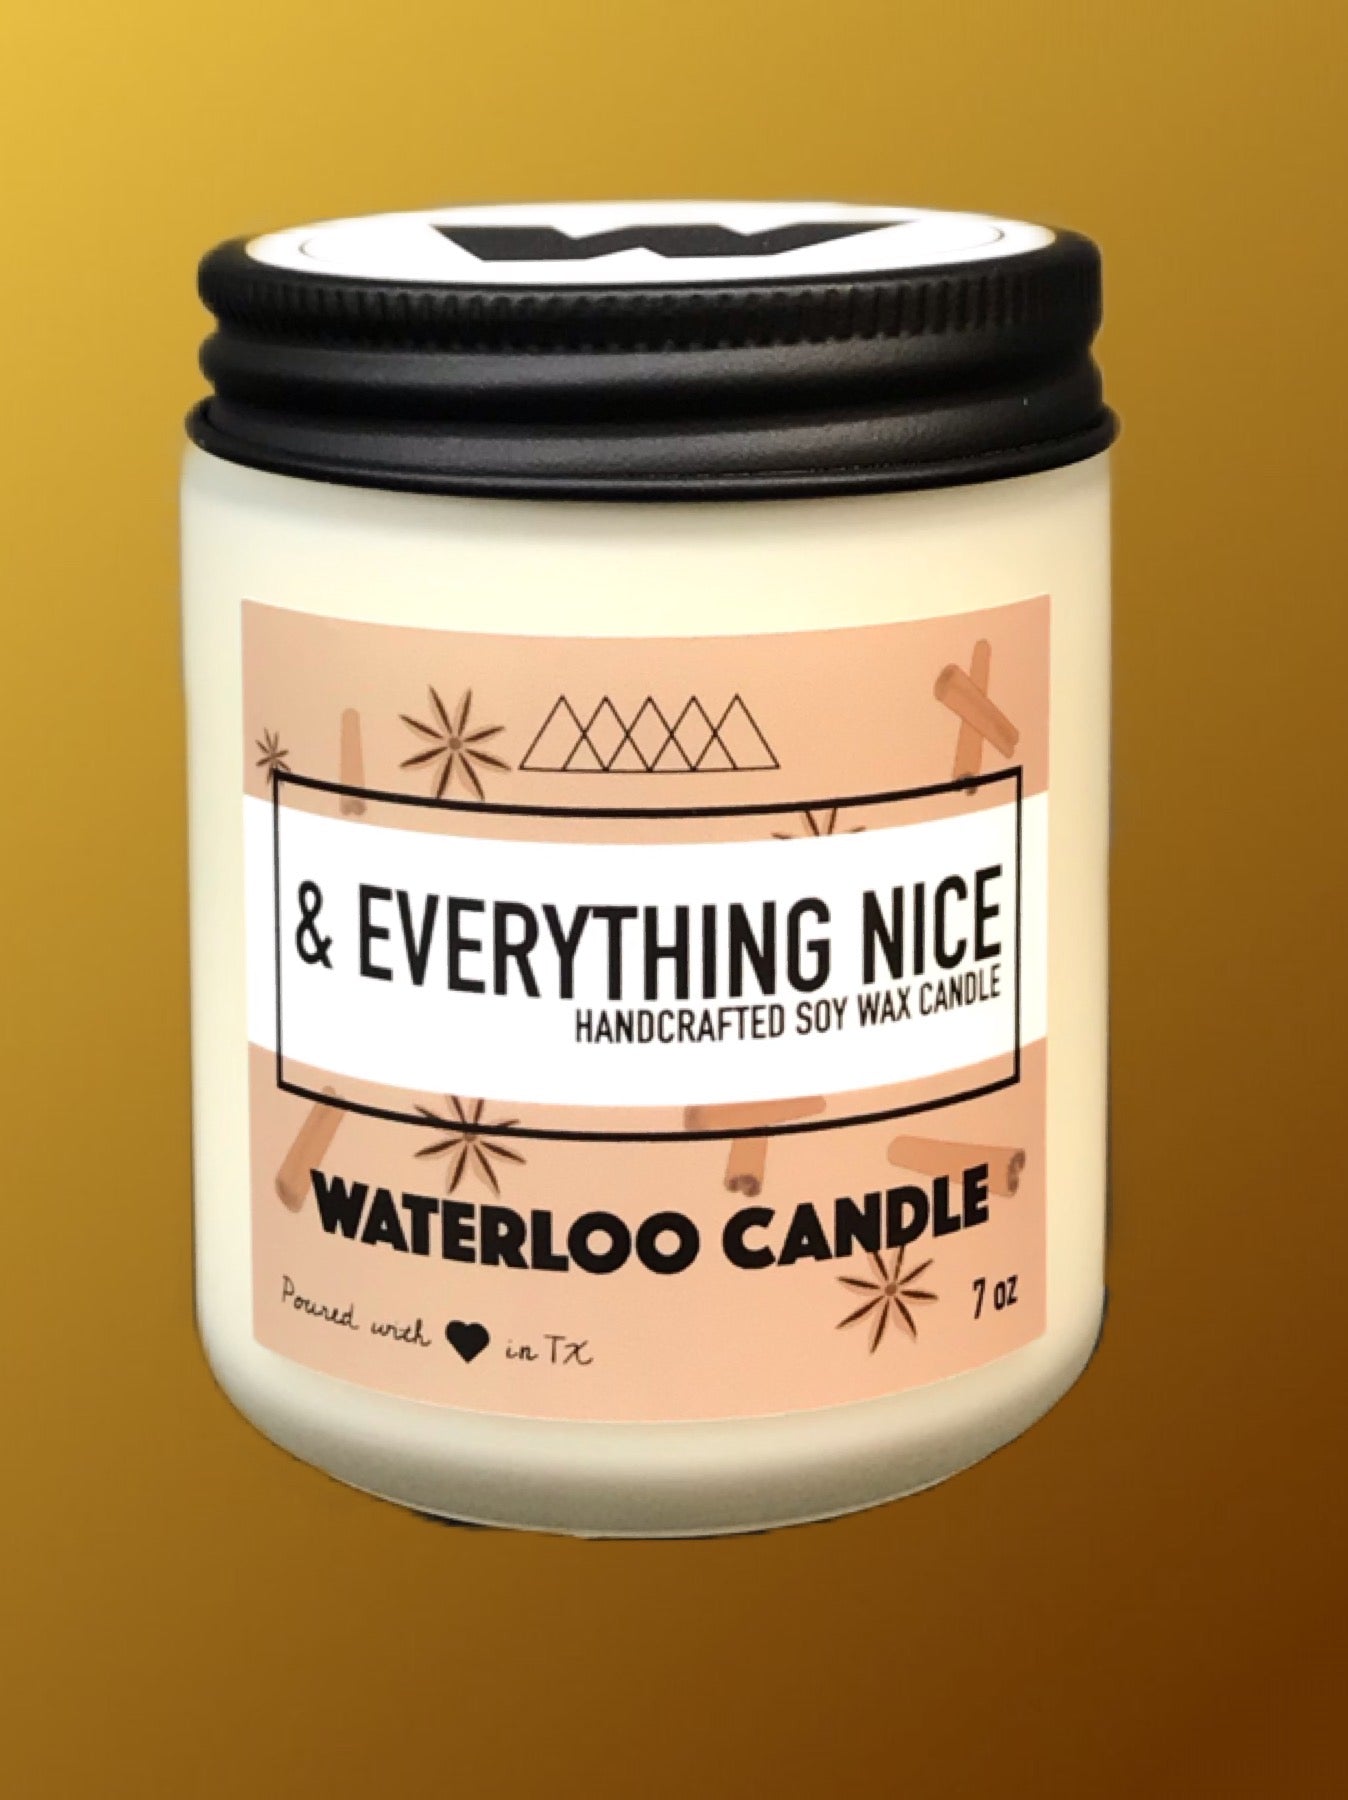 & Everything Nice 7oz Soy Wax Candle